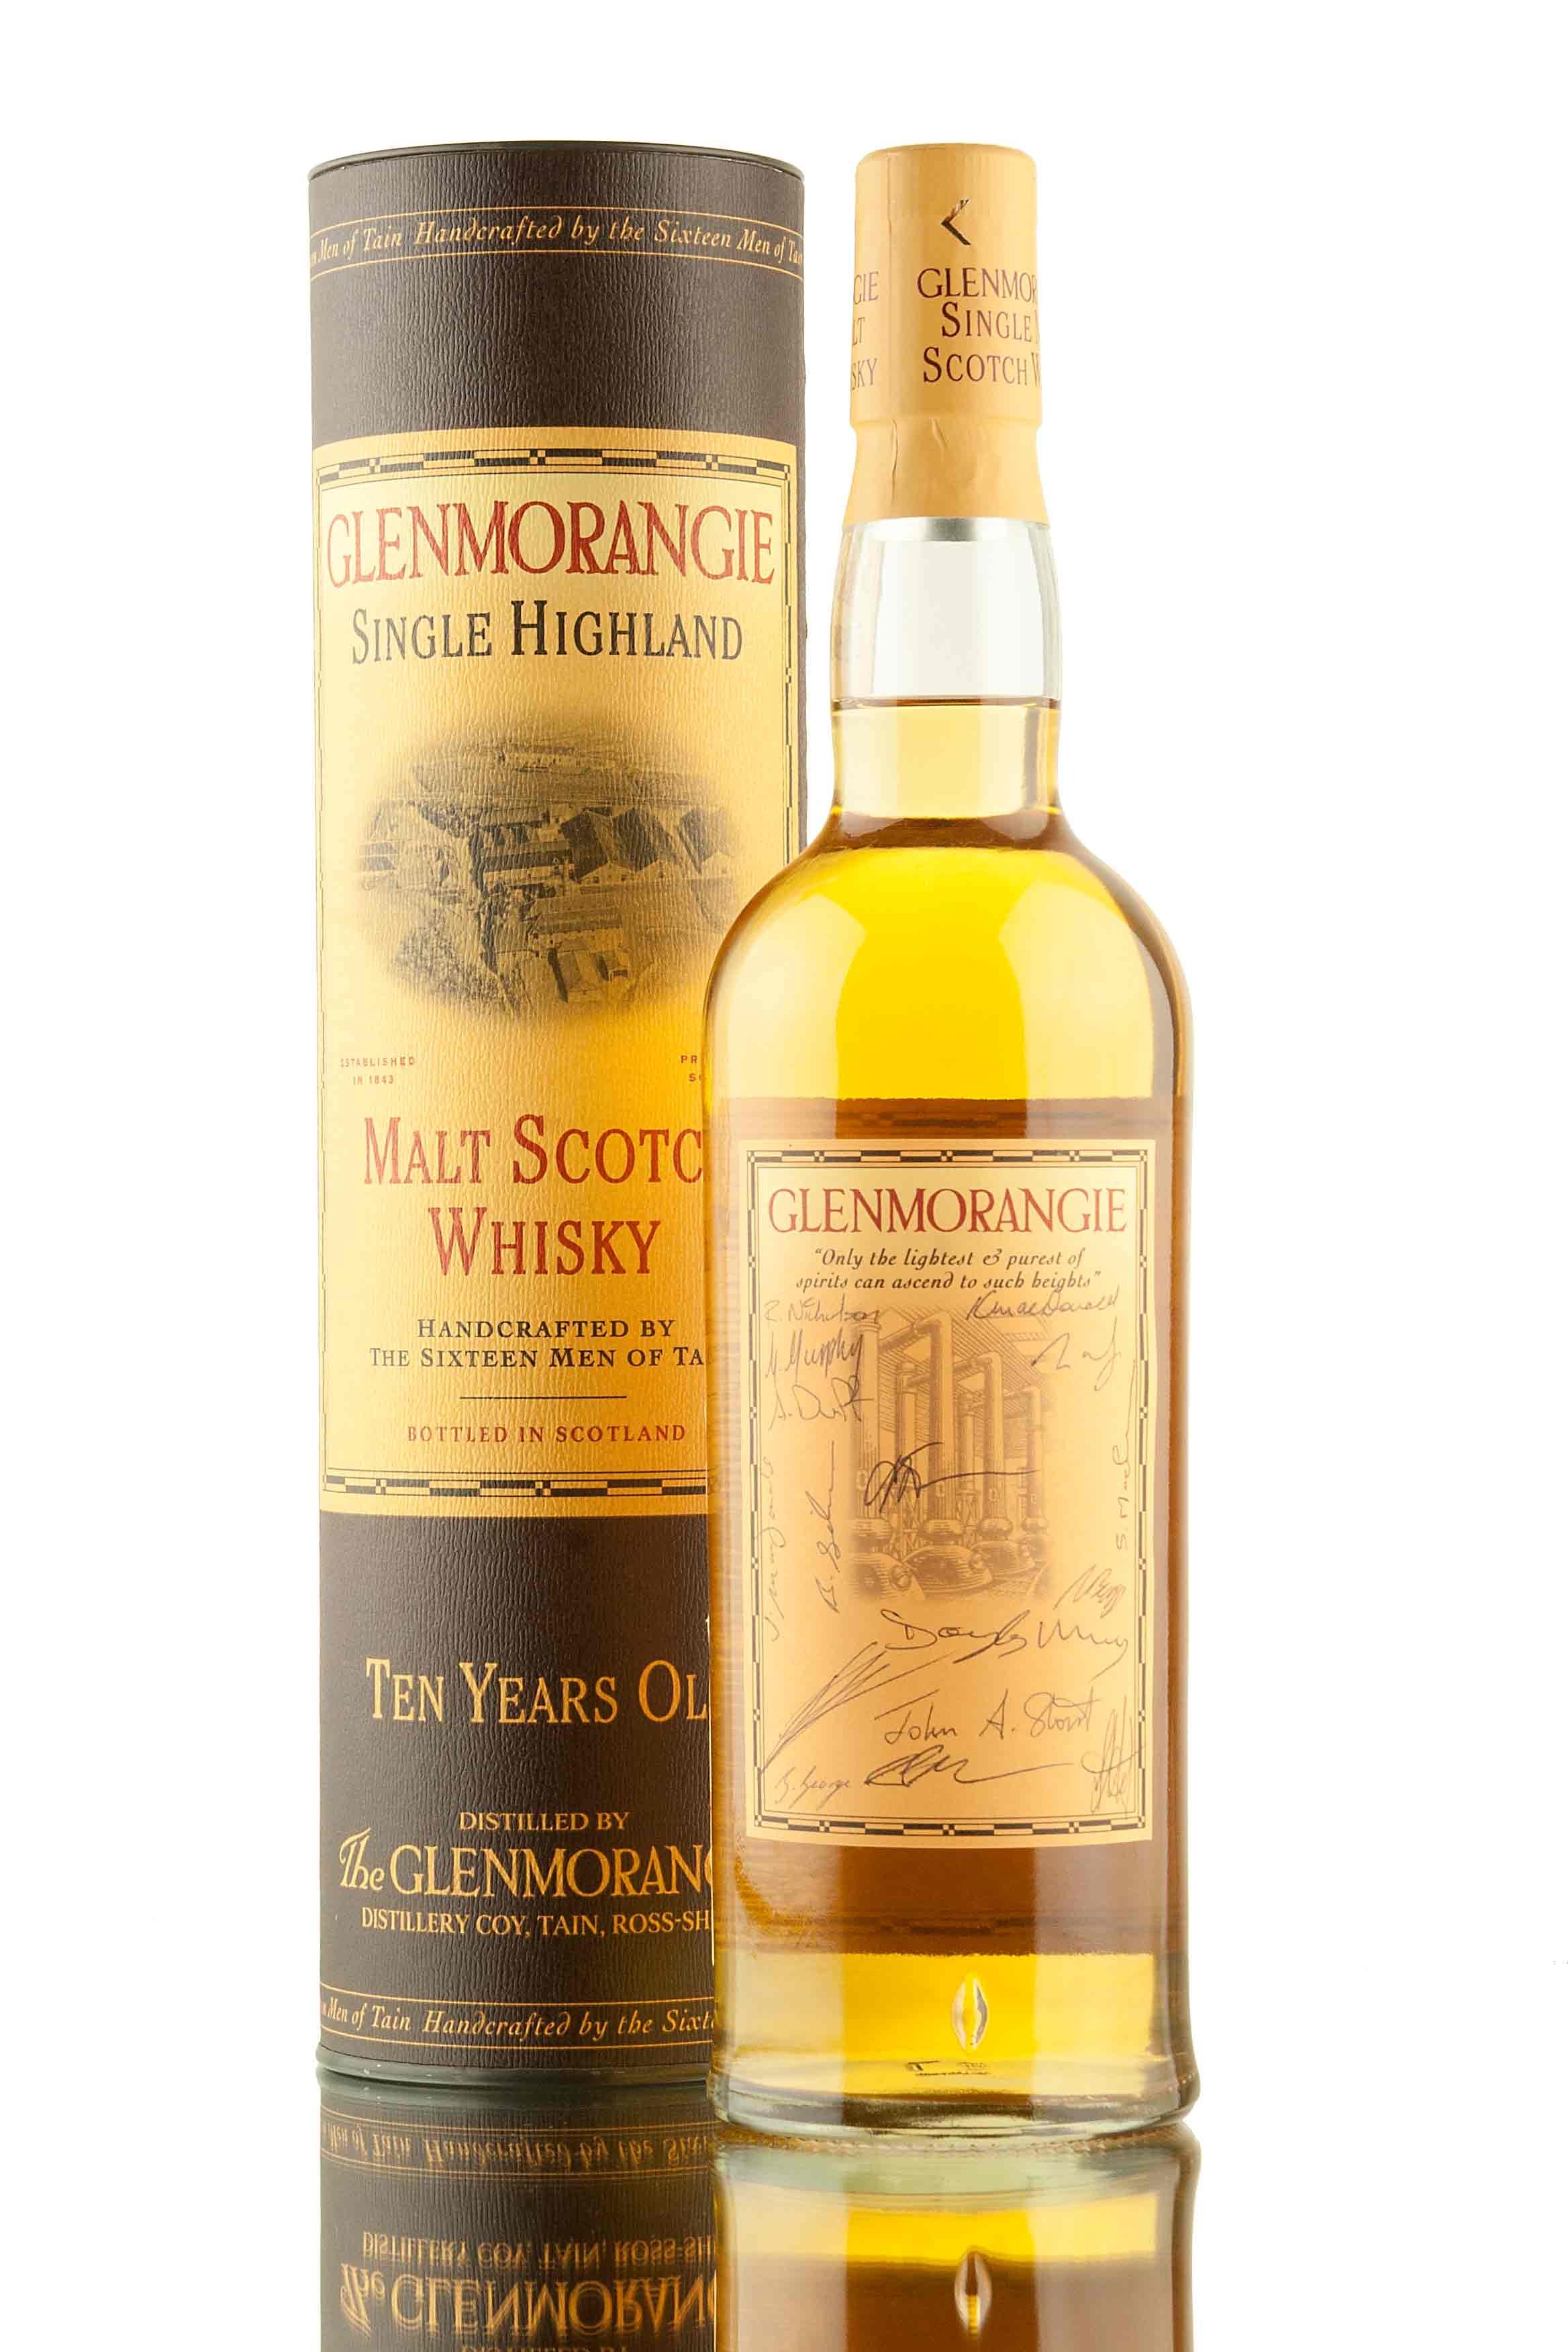 Glenmorangie Hand Signed By The Sixteen Men Of Tain